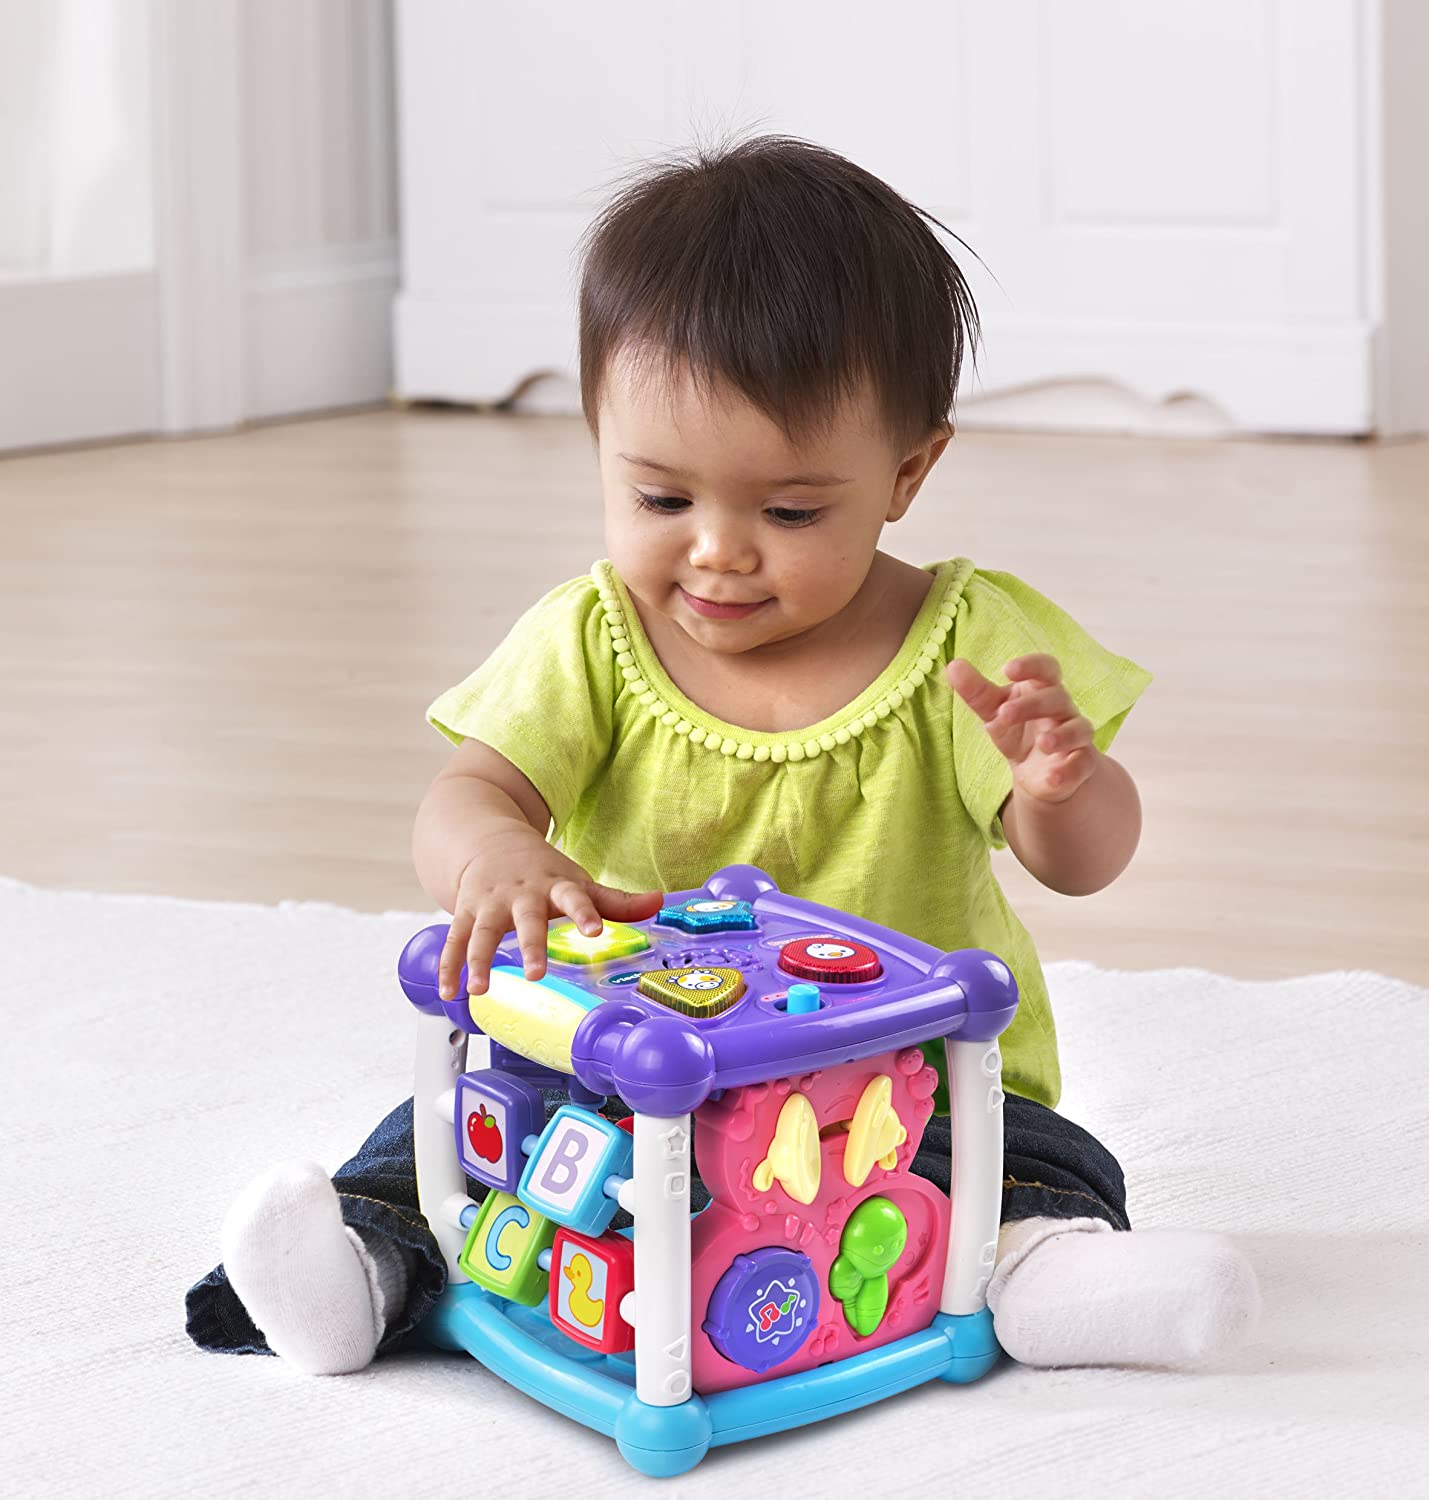 VTech Busy Learners Activity Cube, Purple - with 5 sides of play encourage discovery and exploration